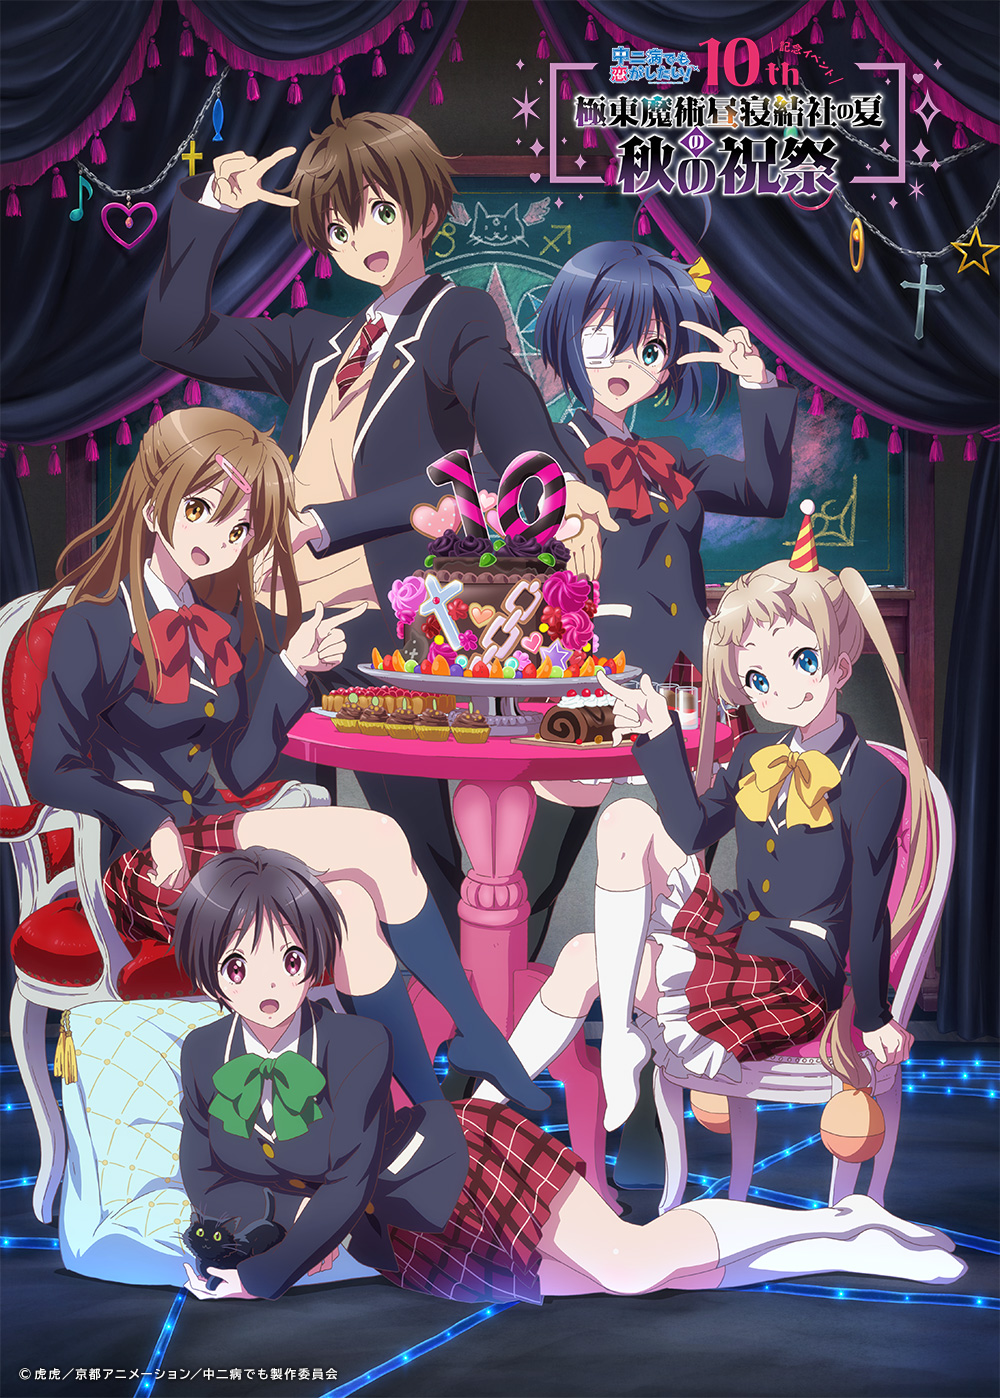 Crunchyroll - Love, Chunibyo & Other Delusions Anime Eyes 10th Anniversary  with New Visual, Event in November